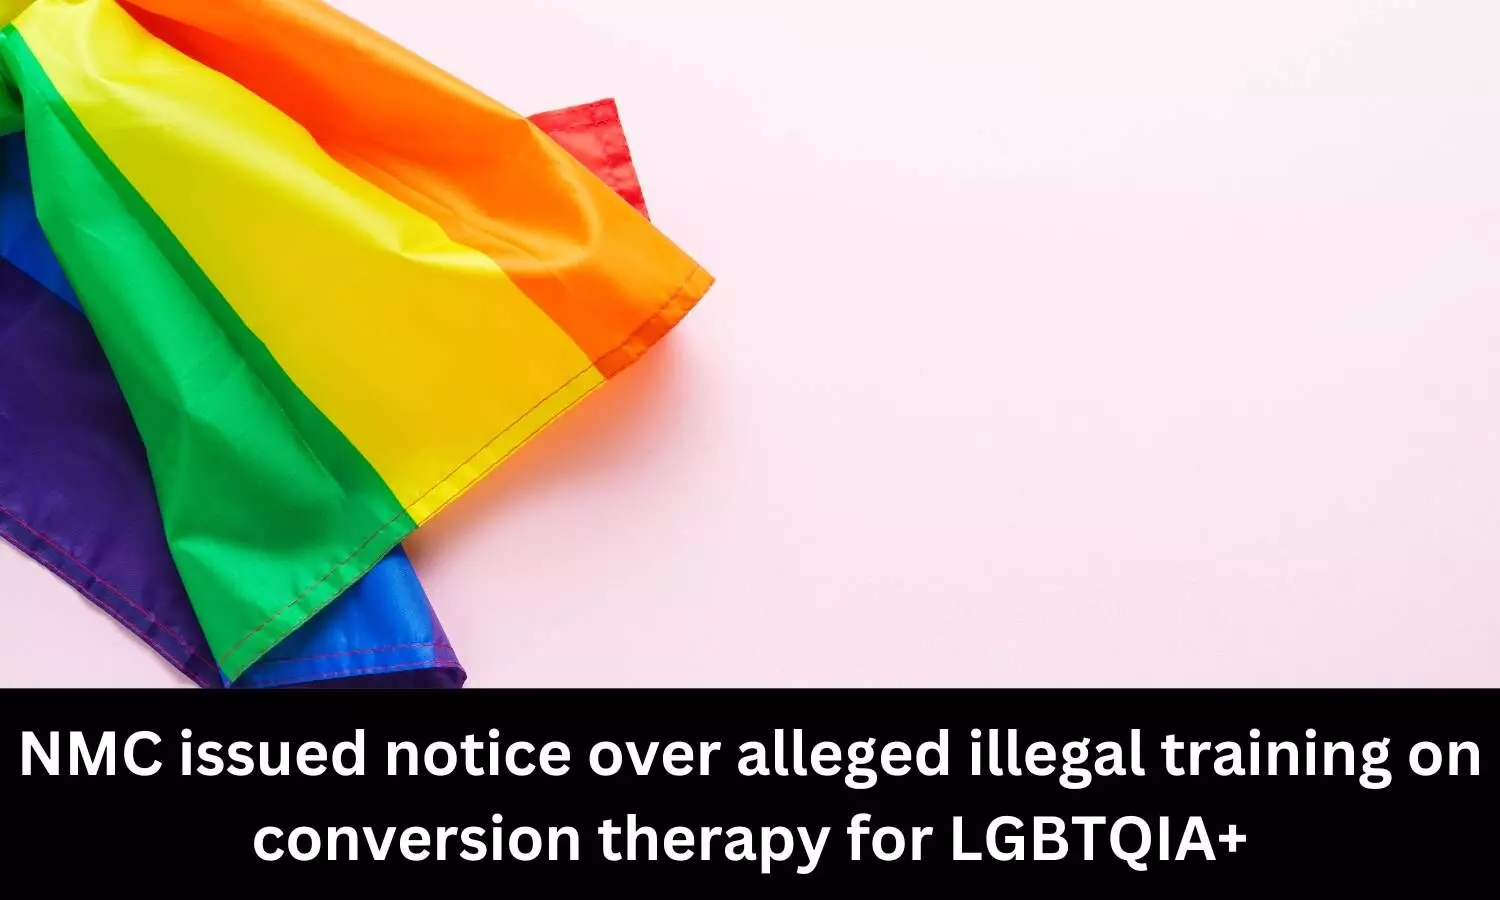 Delhi Commission for Women issues notice to NMC over alleged illegal training on conversion therapy for LGBTQIA+